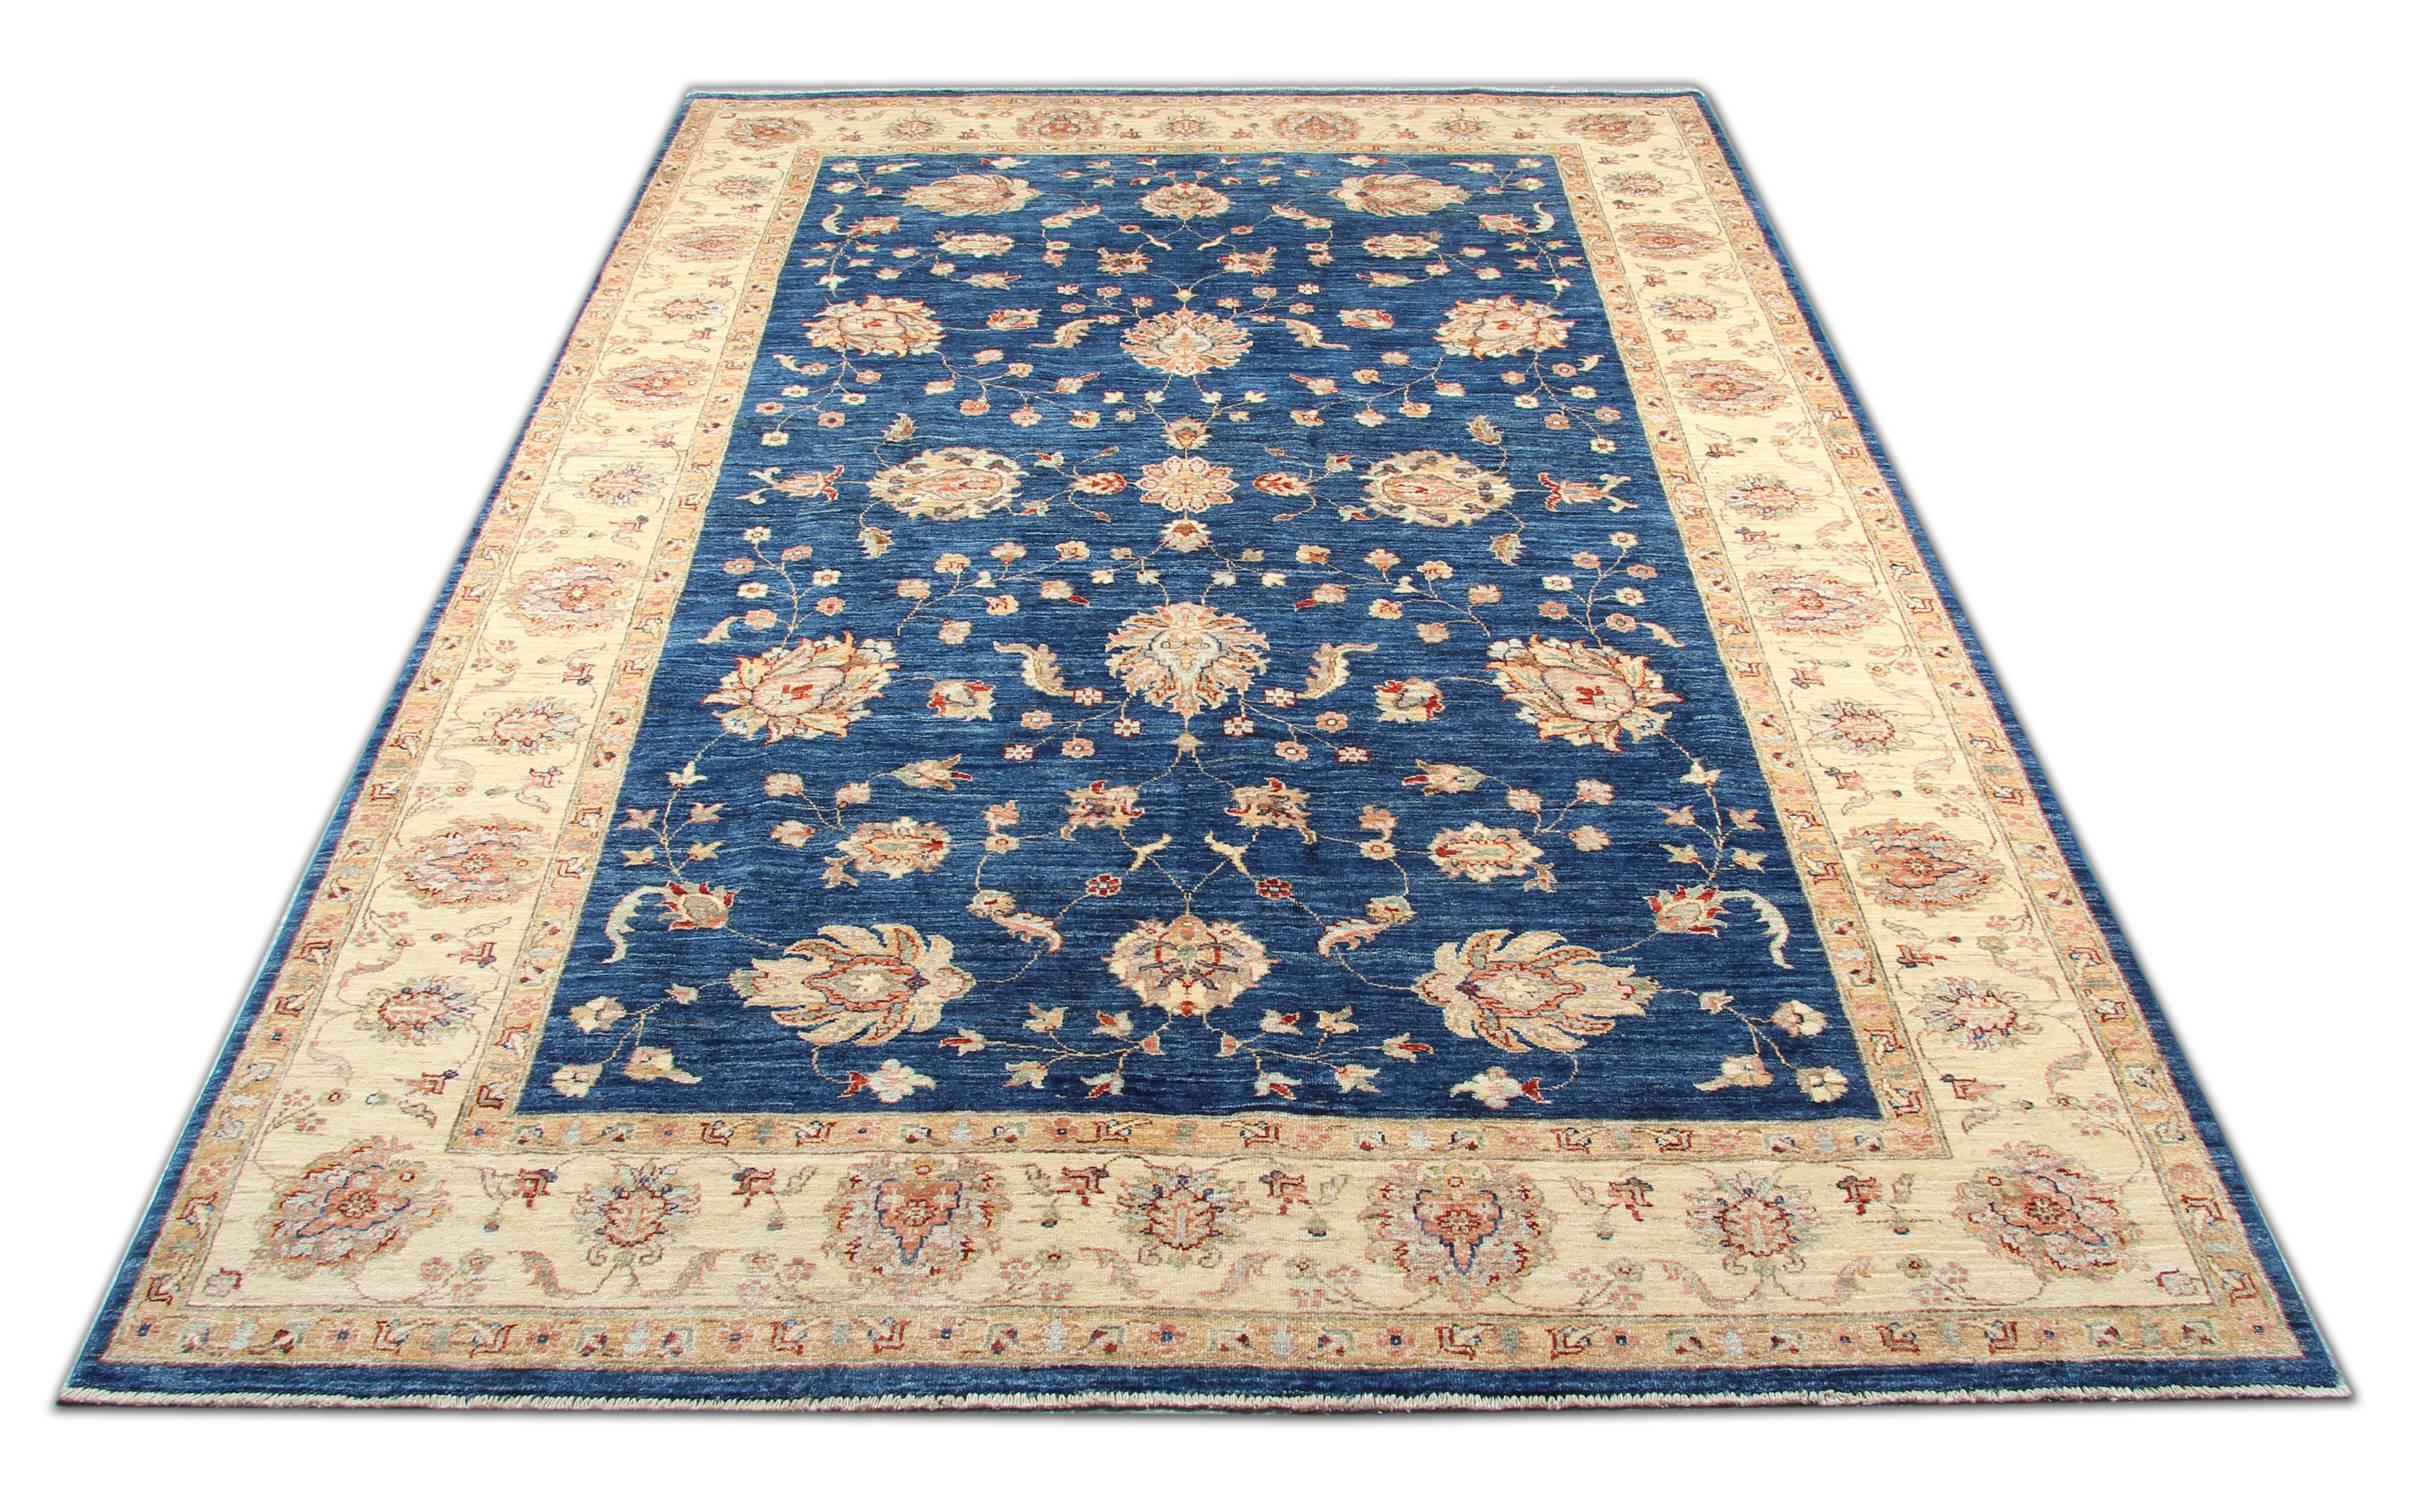 This magnificent golden blue rug is a Ziegler Sultanabad woven rug made on our looms by our master weavers in Afghanistan. The carpet rug is handmade with all natural veg dyes and all hand spun wool. The large-scale floral rug design makes